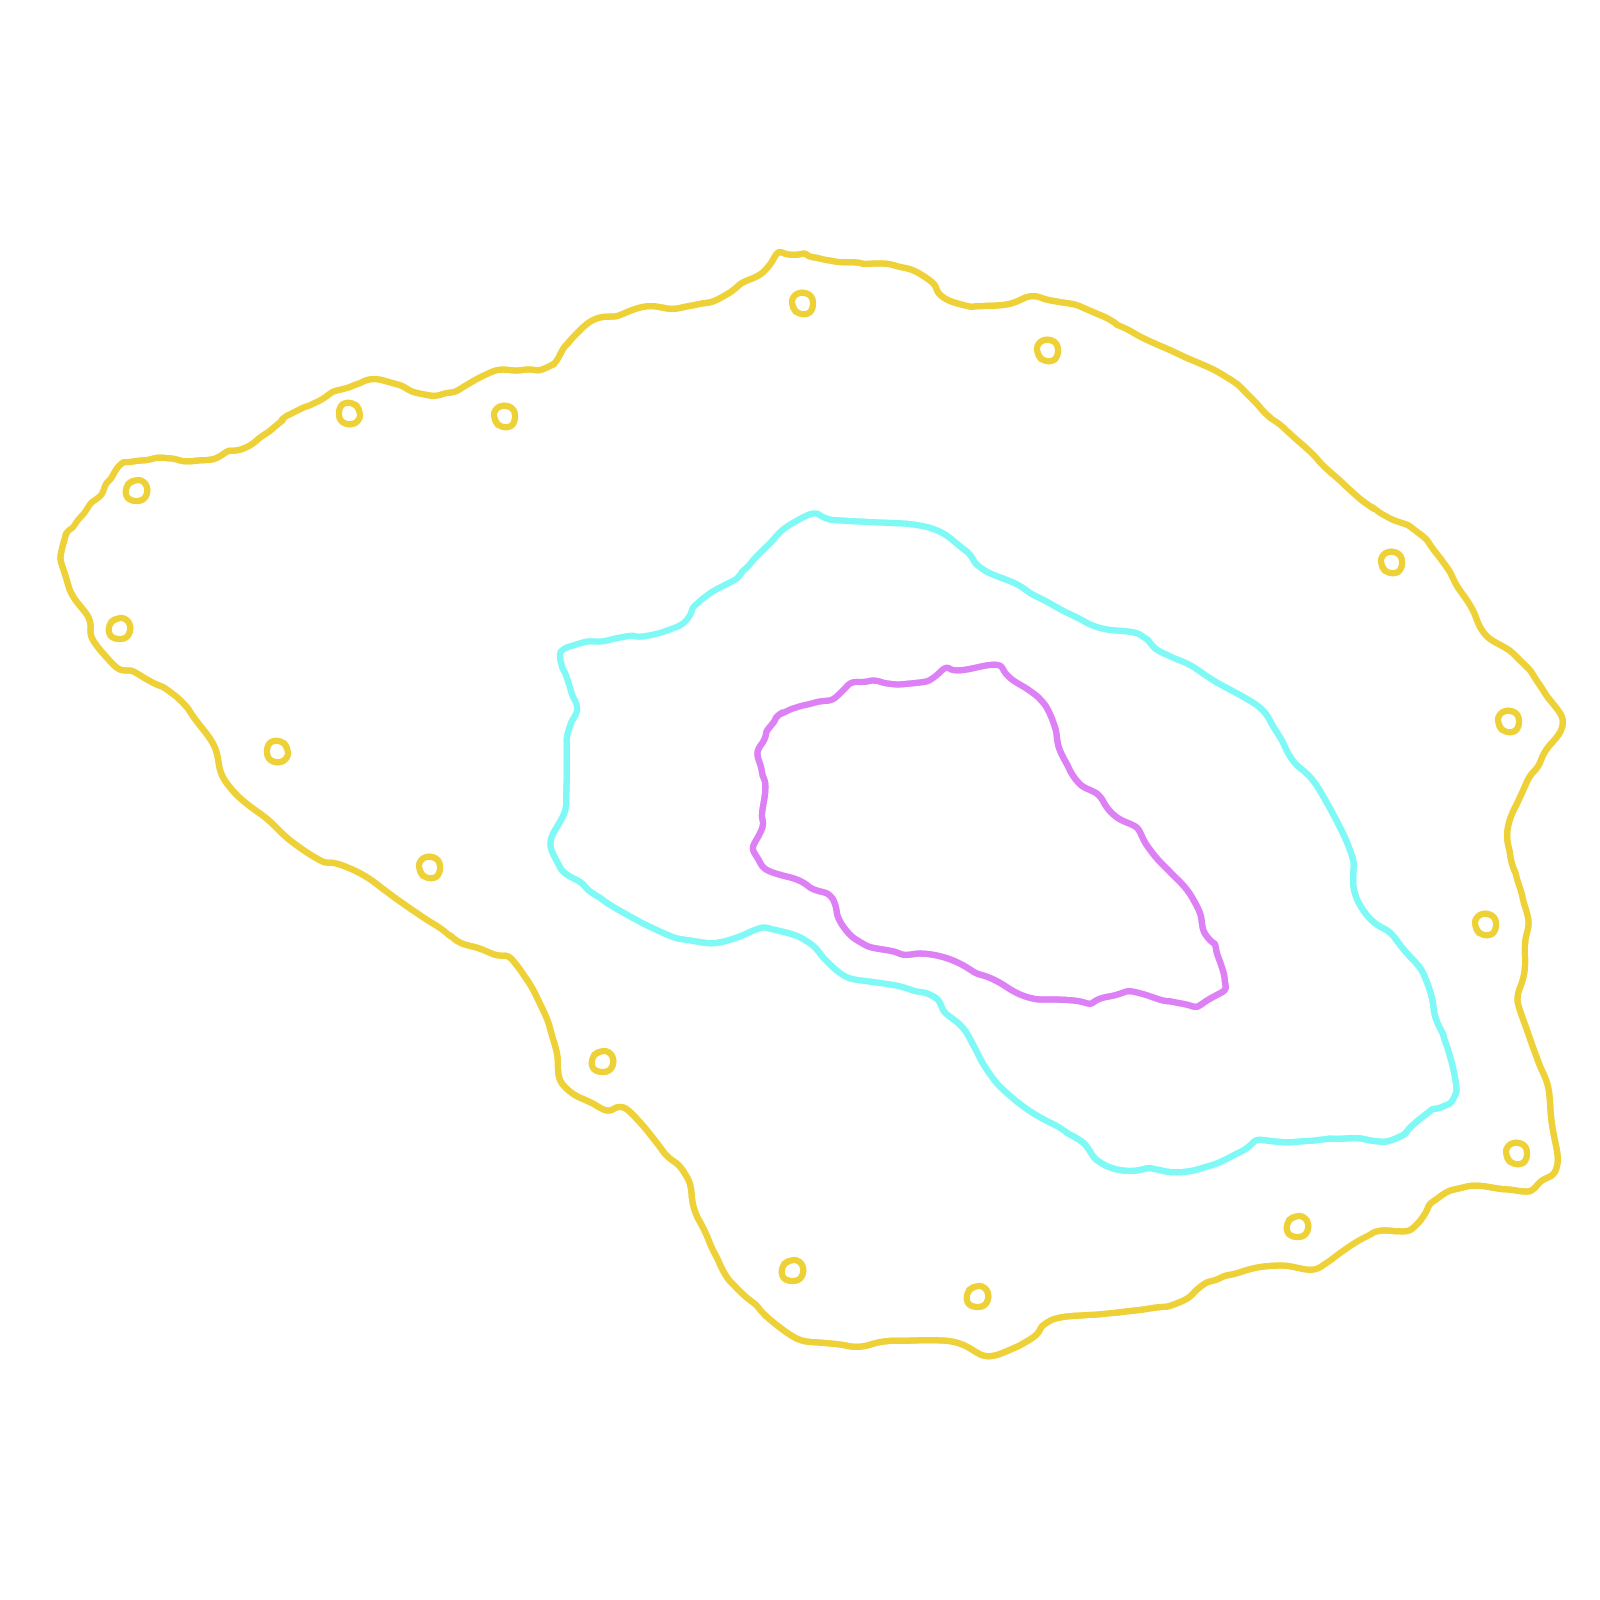 A map of an island, with its district borders marked.